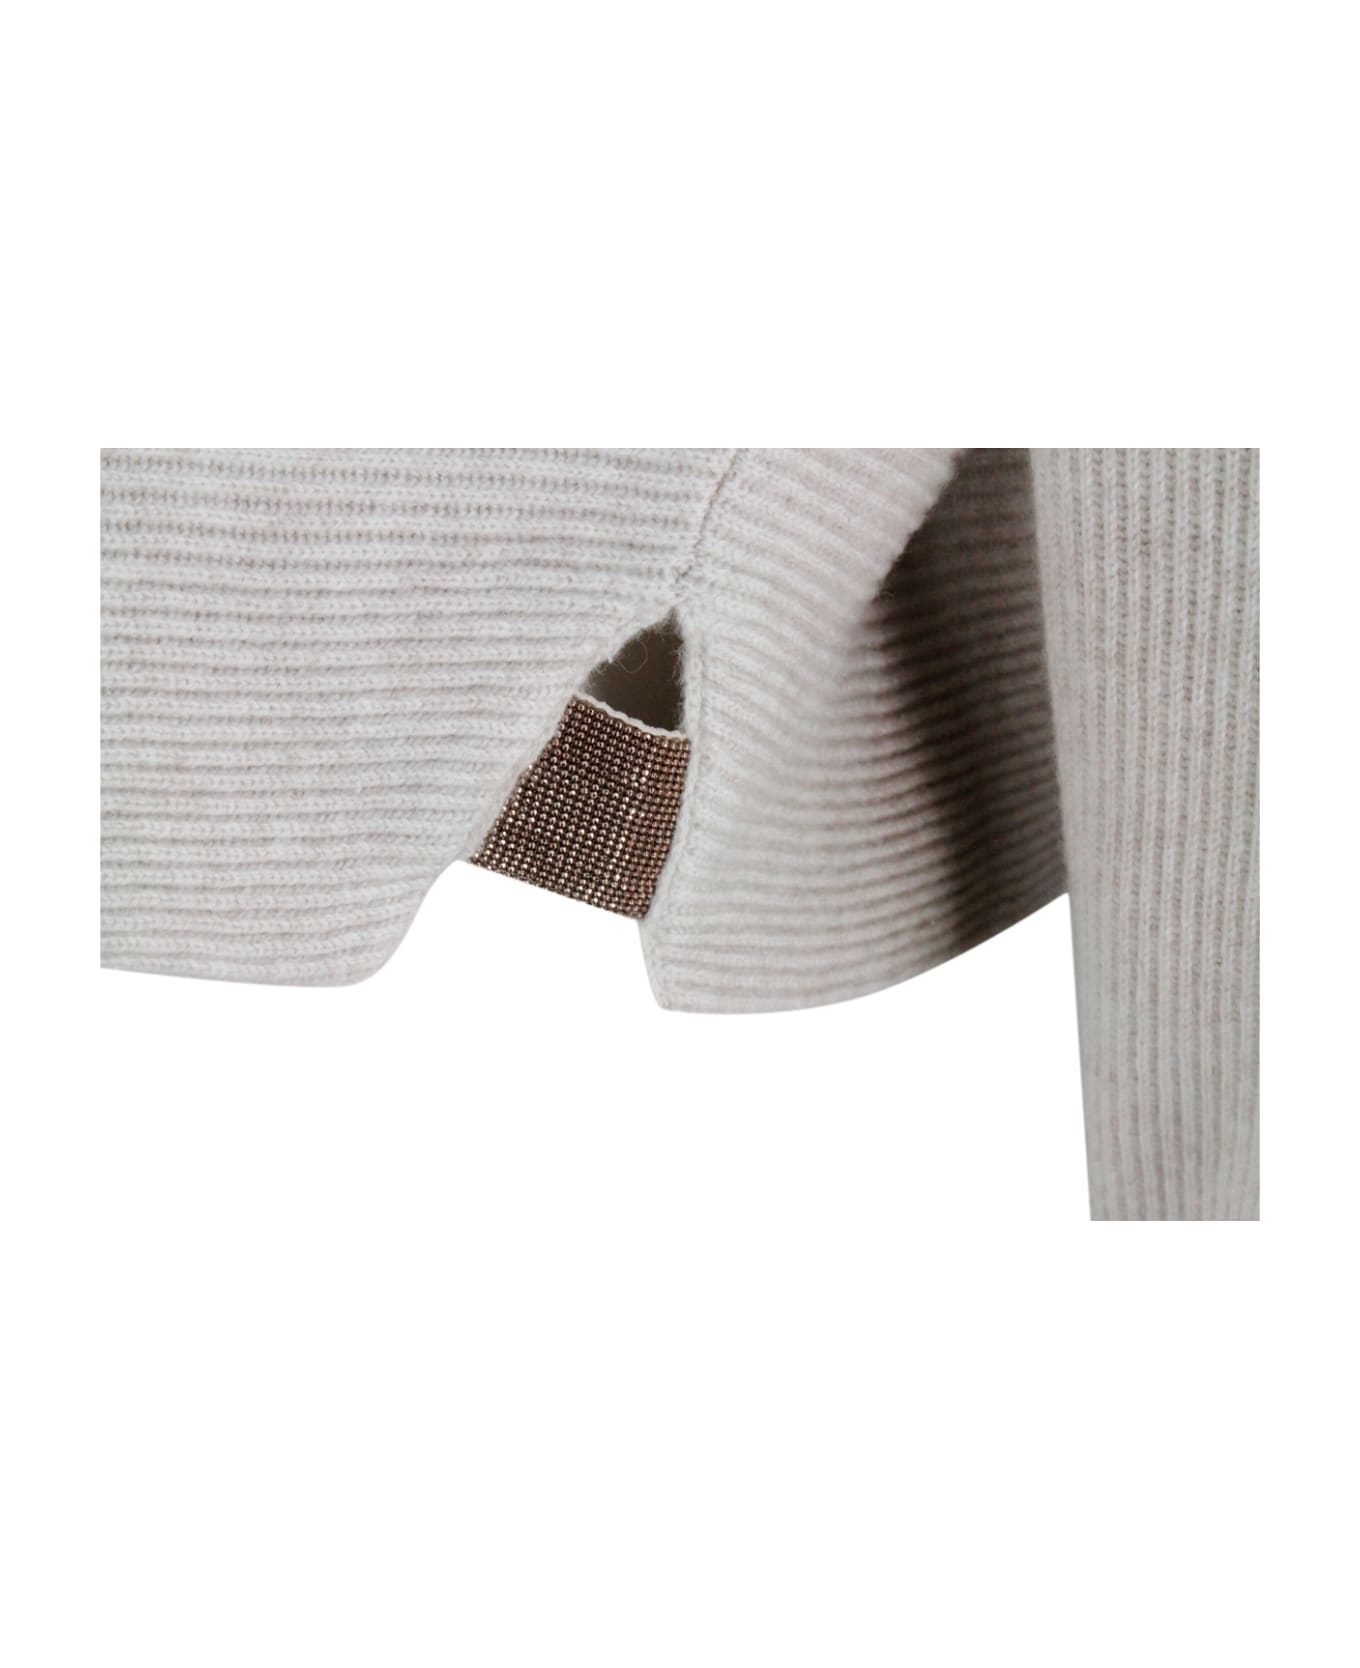 Brunello Cucinelli High Neck Sweater In Wool, Silk And Cashmere With English Rib Knit With Precious Shiny Monili On The Side Slits - Beige